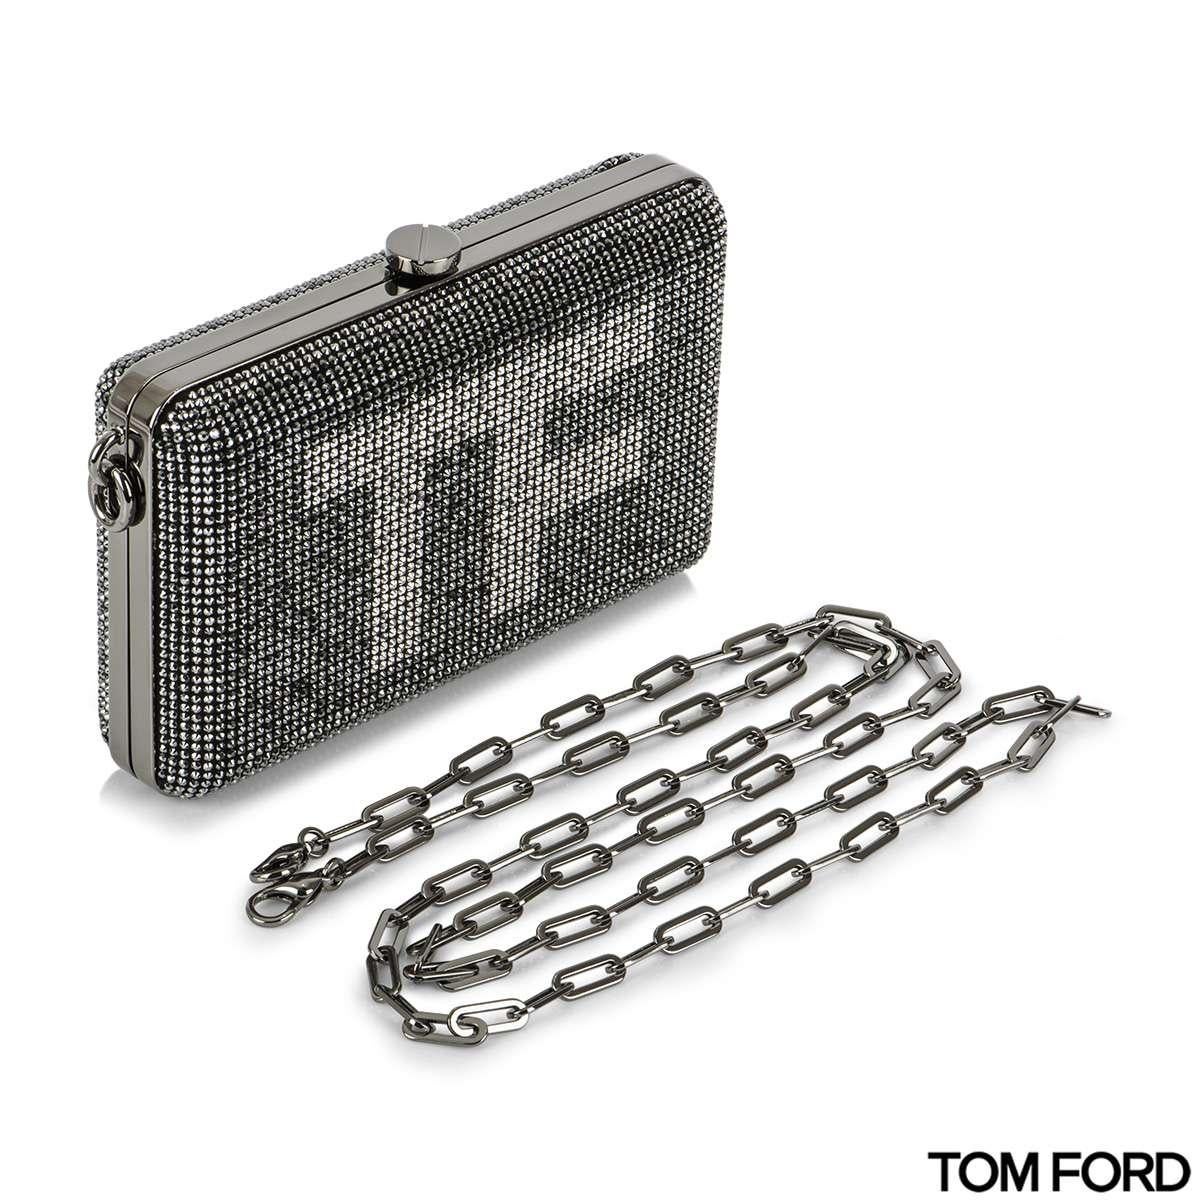 A stunning crystal-embellished mini clutch bag by Tom Ford. This clutch features crystal-embellished soft goatskin leather and contrasting silver-tone crystals with TF design on the front of the clutch. The opening of the clutch is a silver-tone